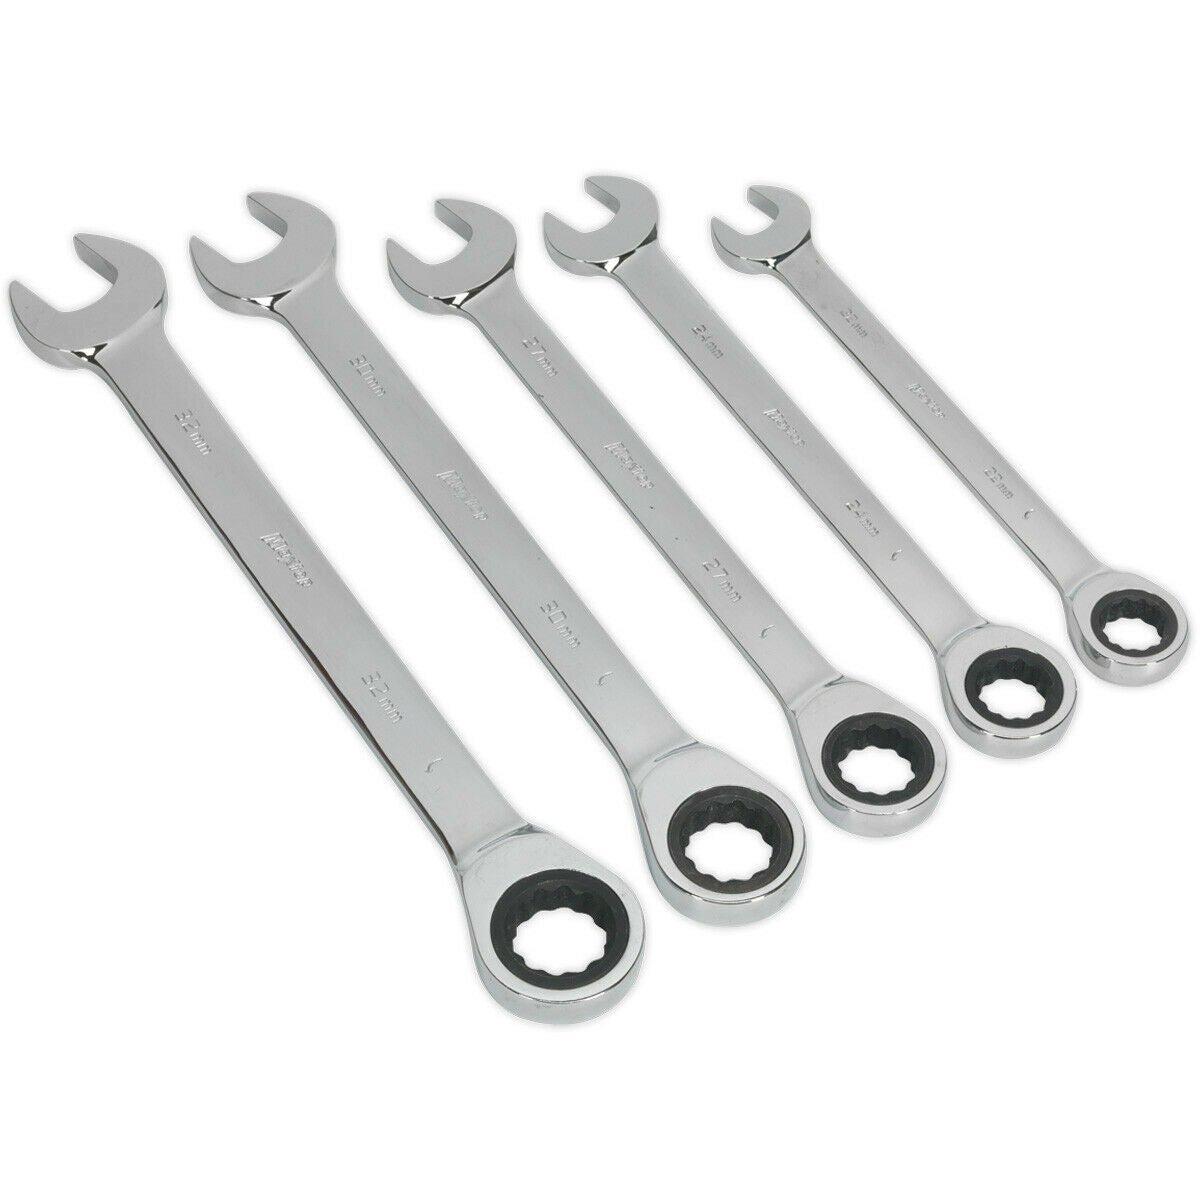 5pc Slim Handled Combination Spanner Set - 12 Point Metric Ring Open End Head